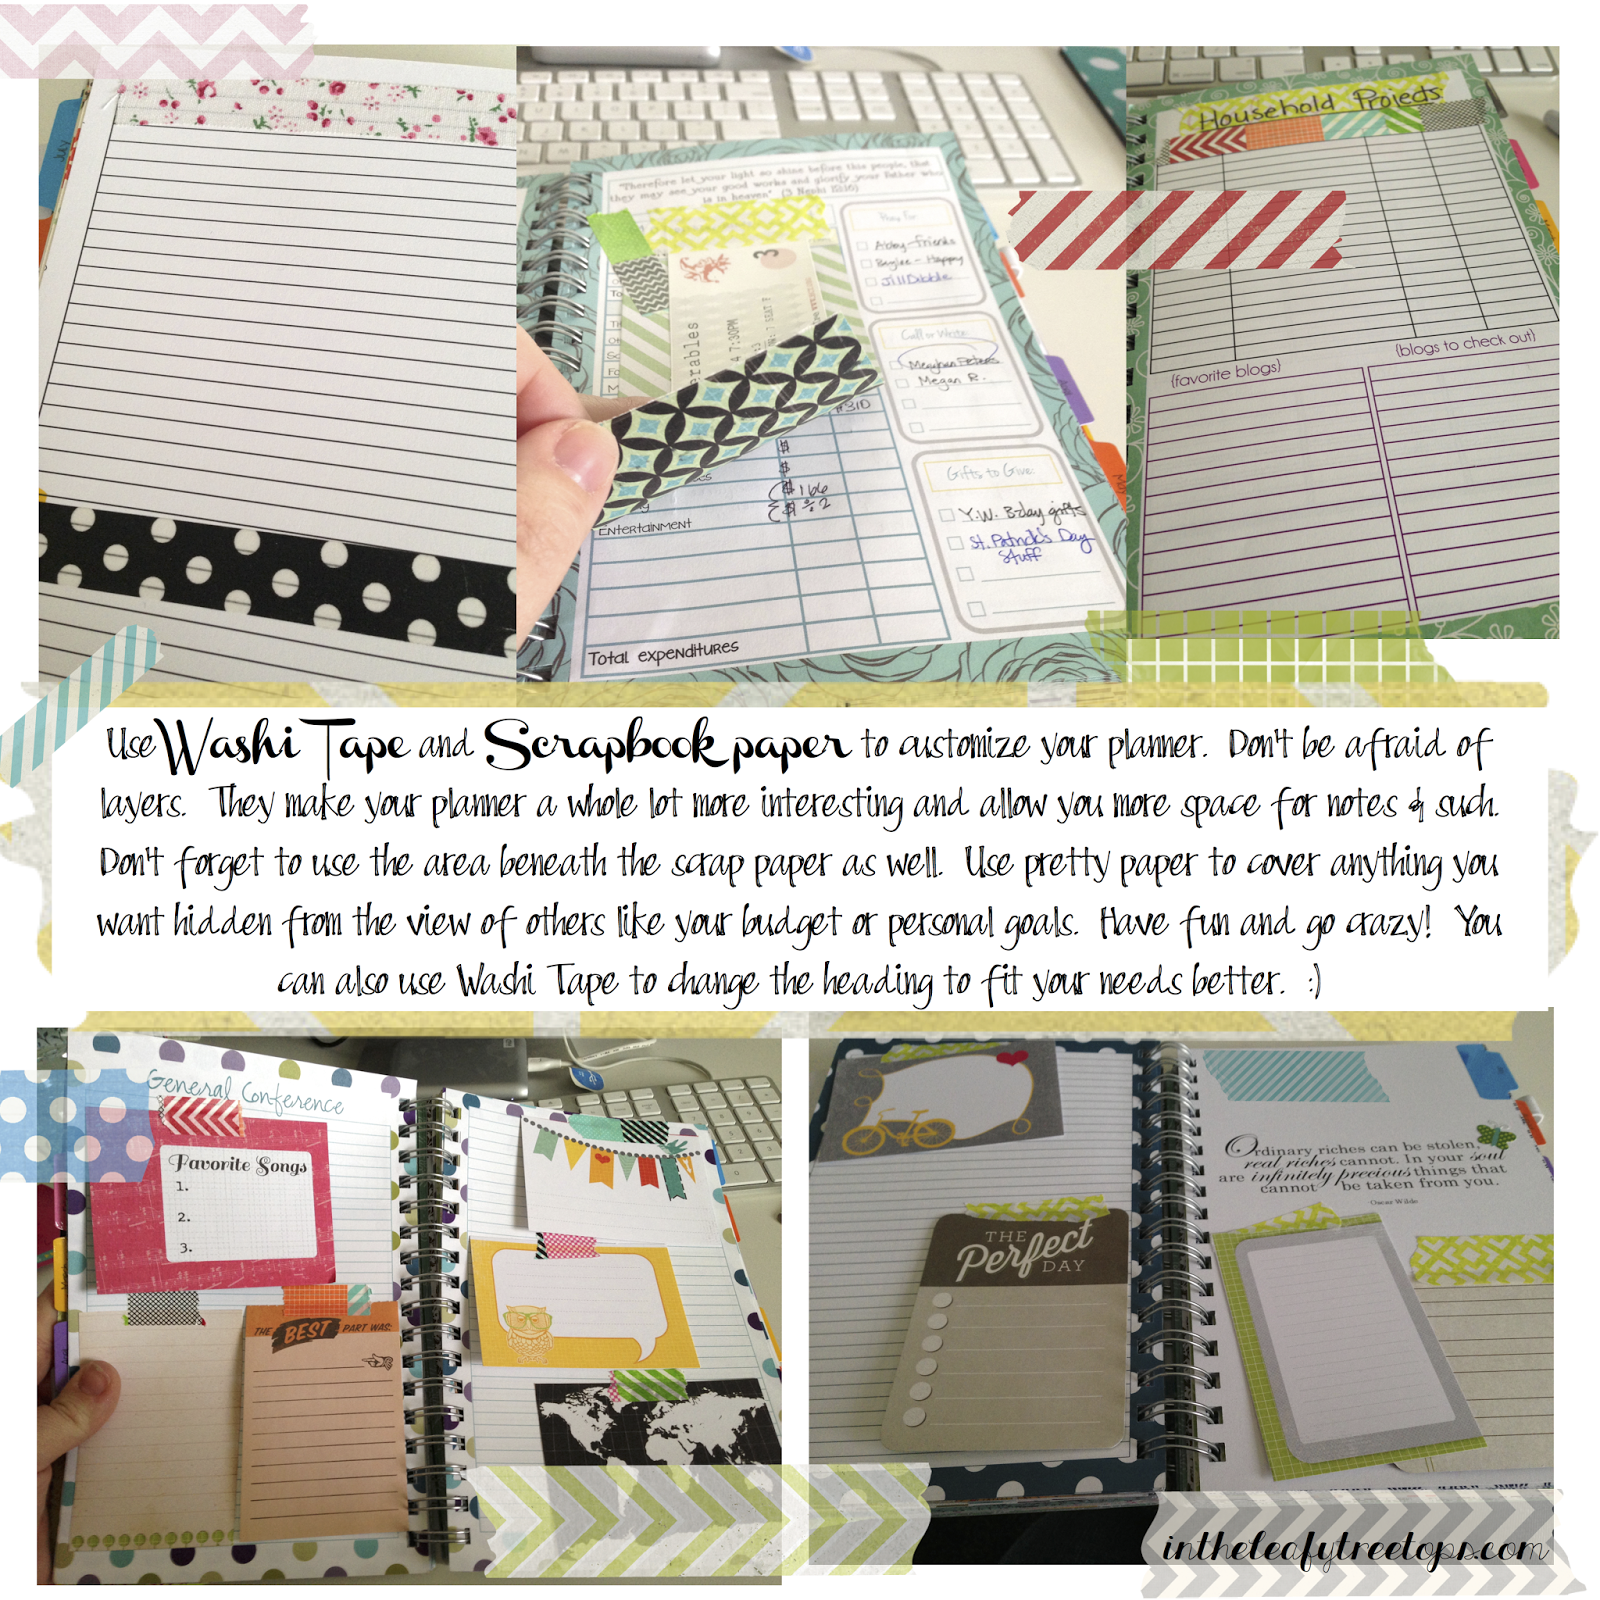 Mormon Mom Planners - Monthly Planner/Weekly Planner: Using Washi